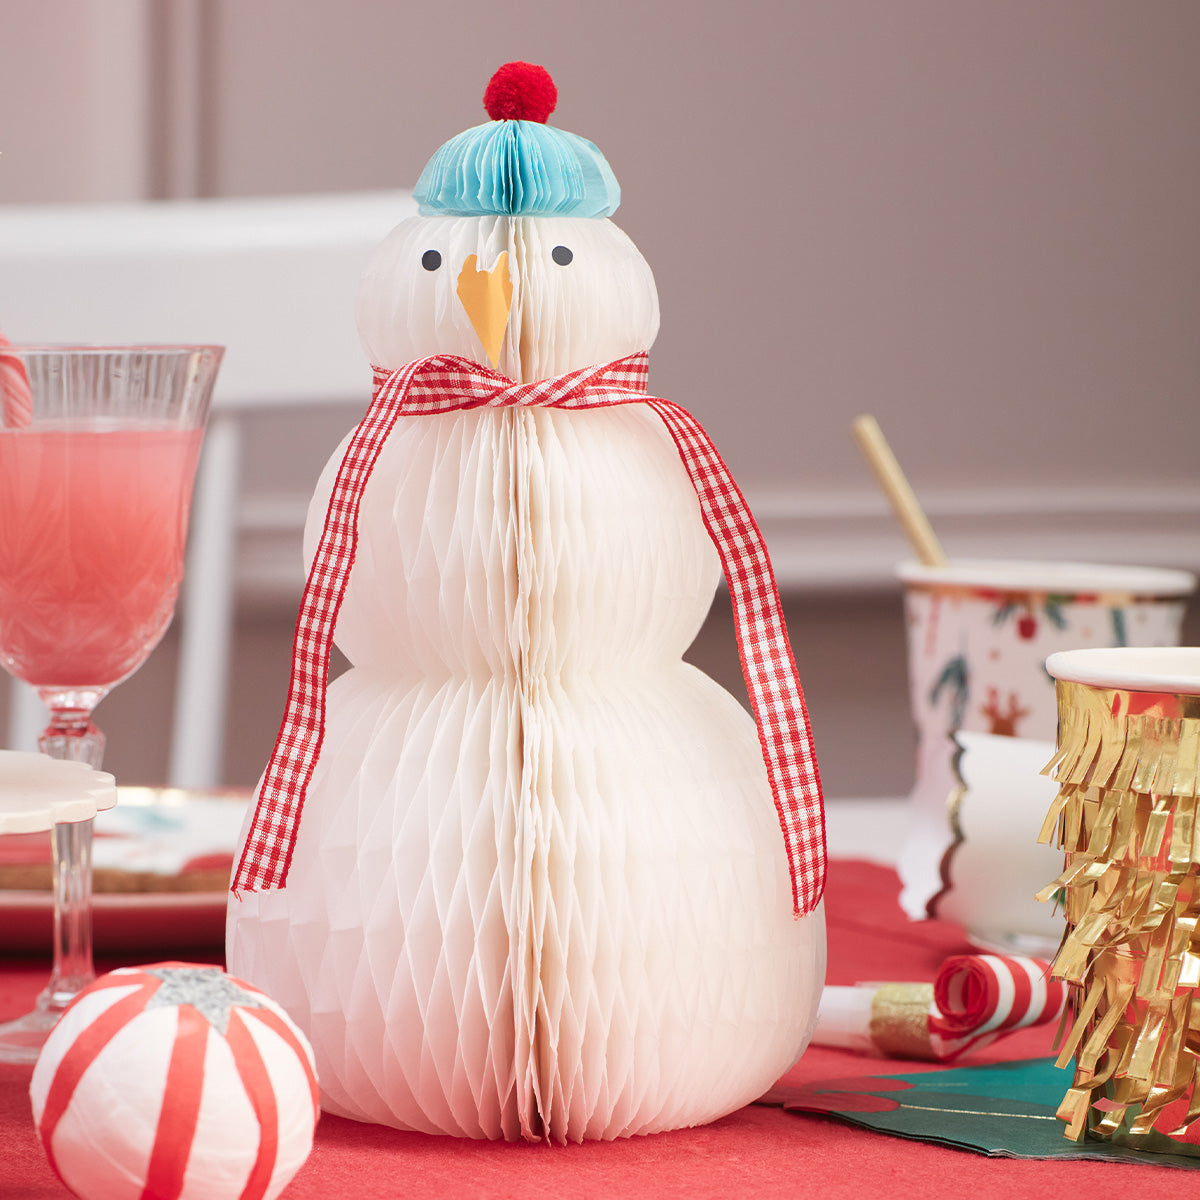 Our honeycomb Christmas table decorations include Christmas trees, Santa, reindeer and a snowman.